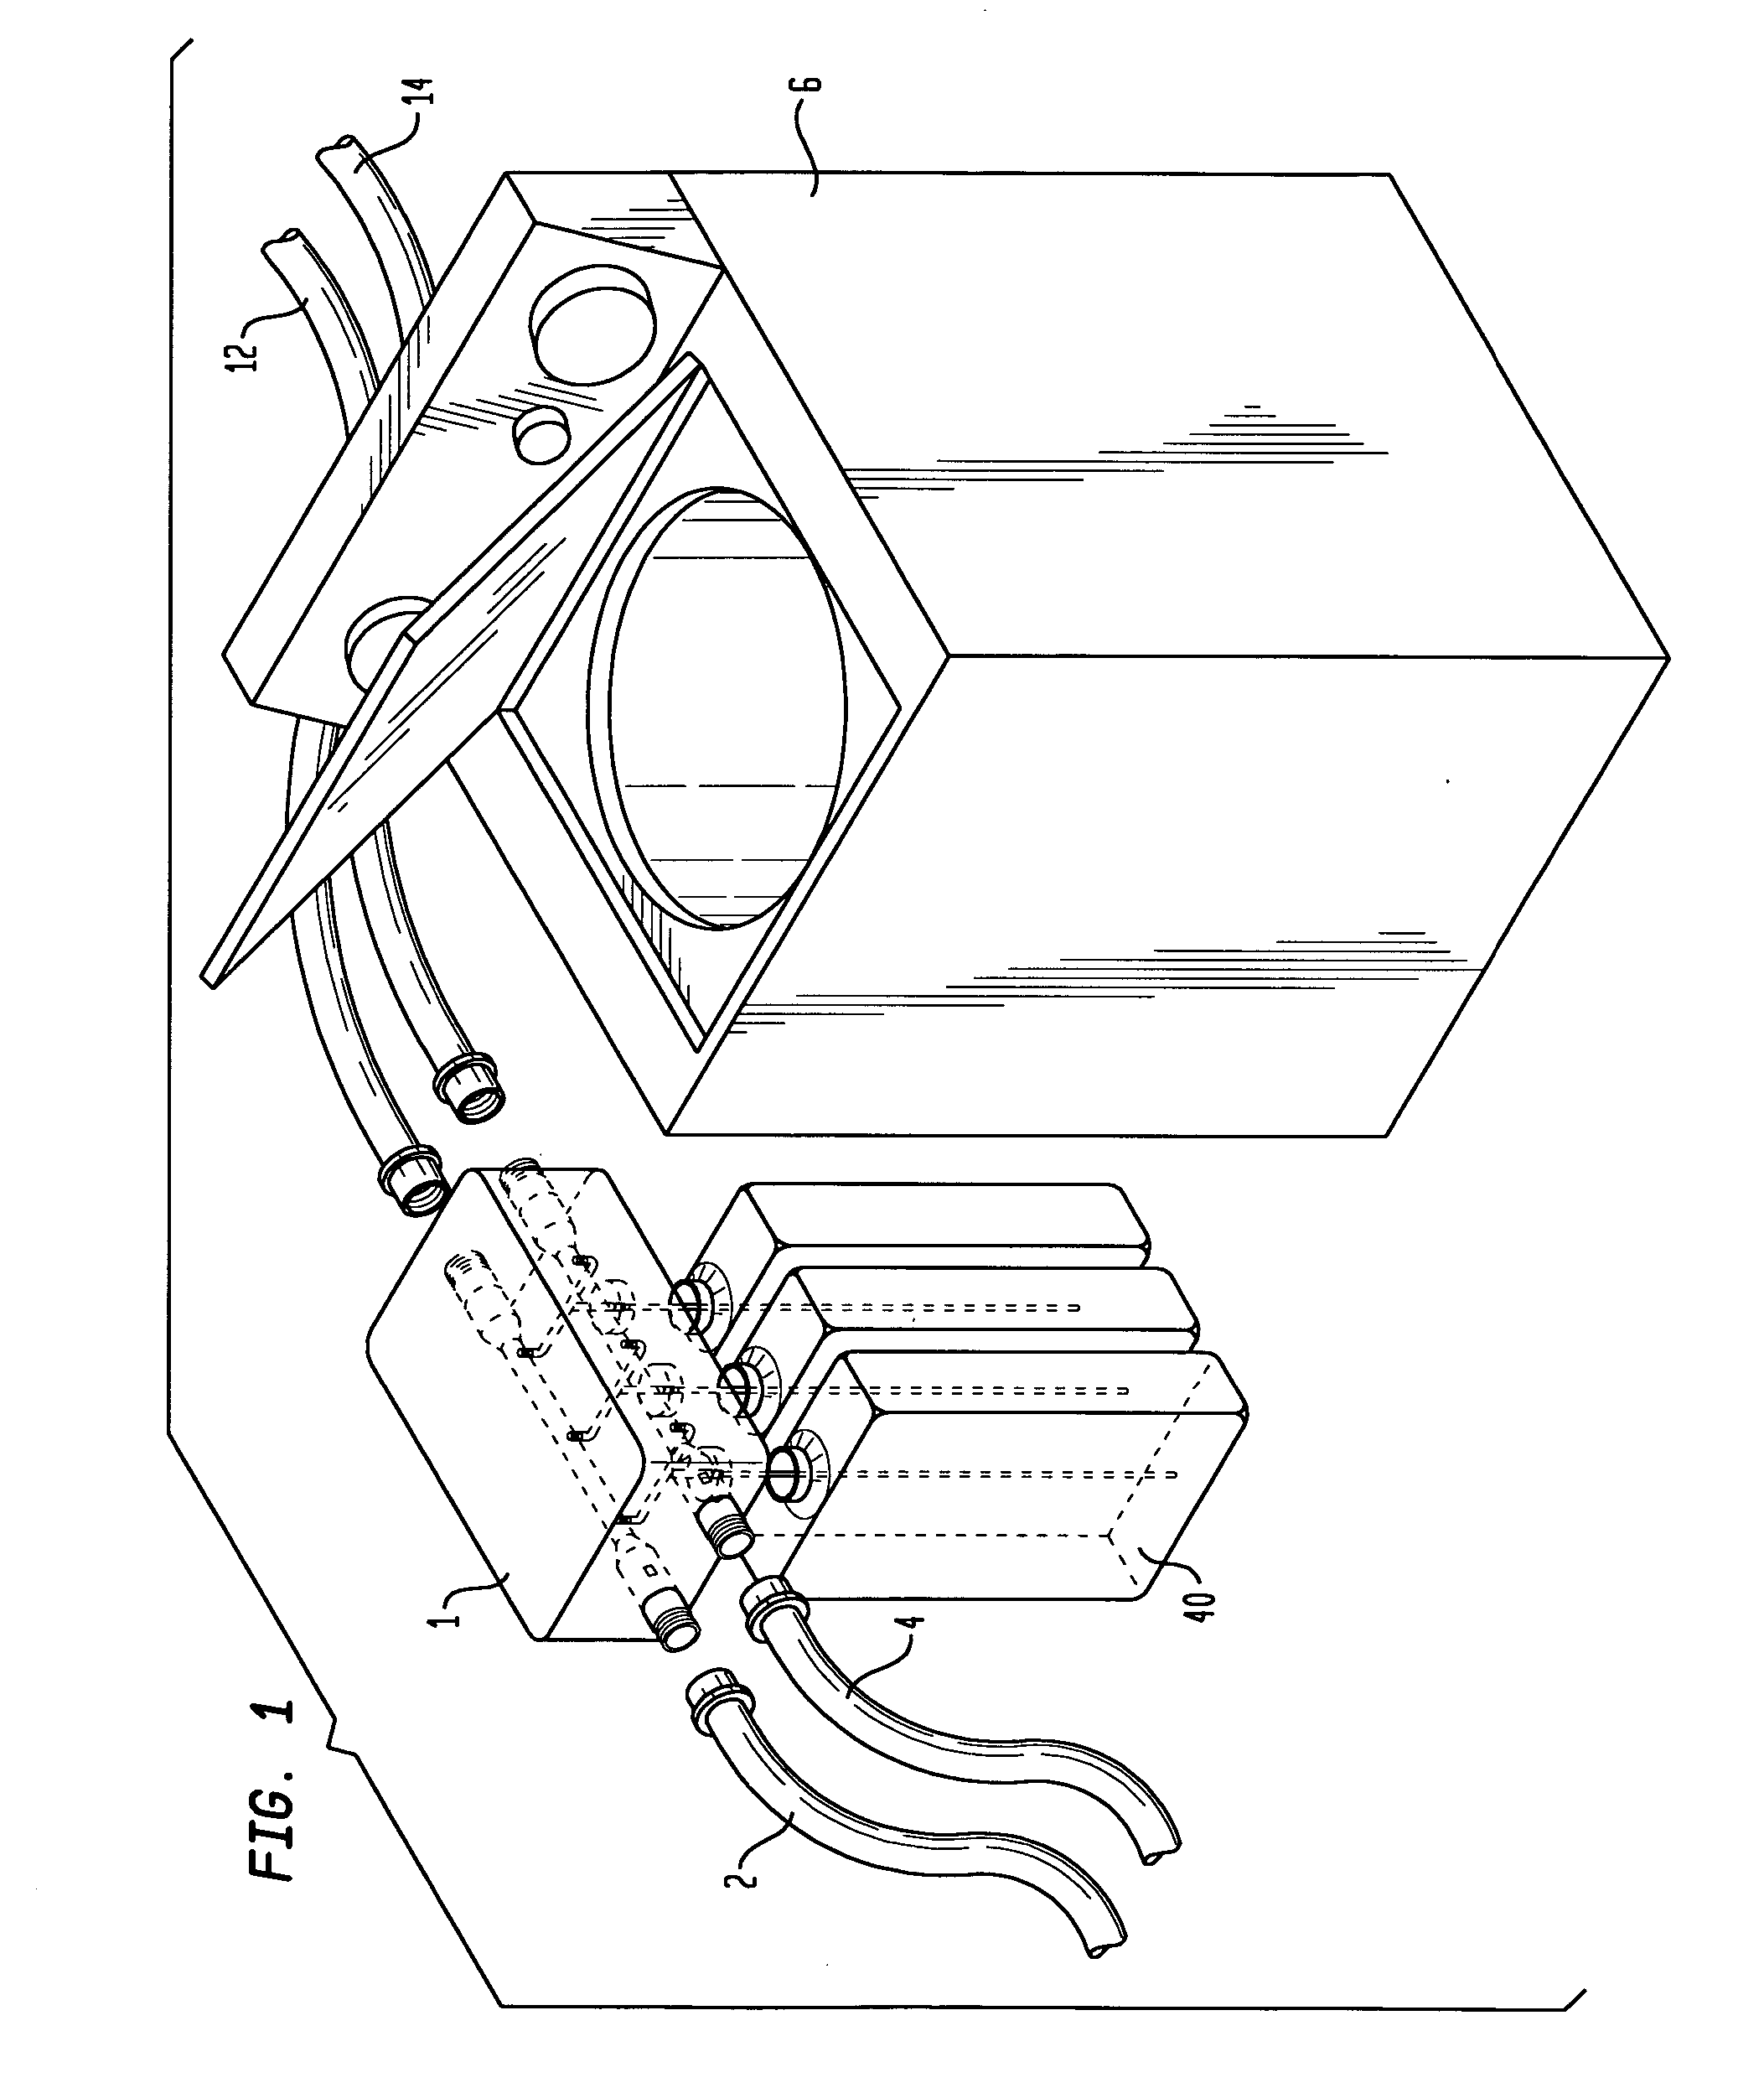 Automatic stand-alone dispensing device for laundry care composition